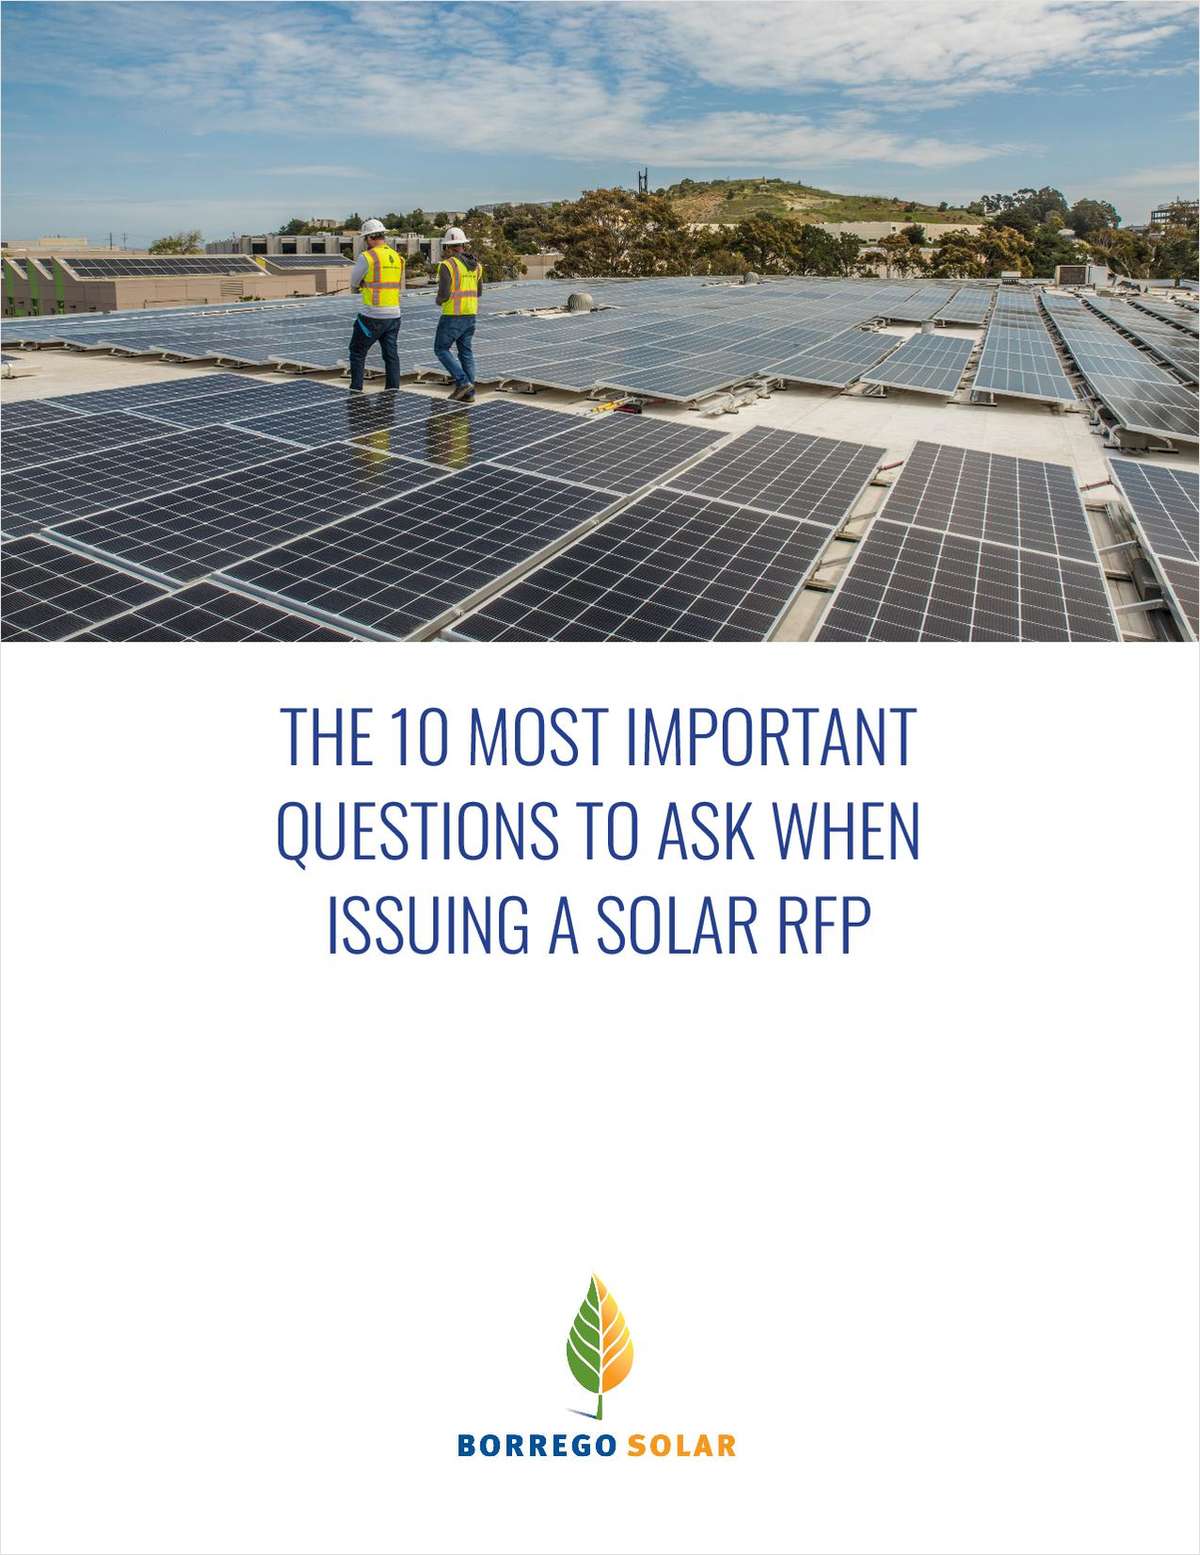 The 10 Most Important Questions to Ask when Issuing a Solar RFP